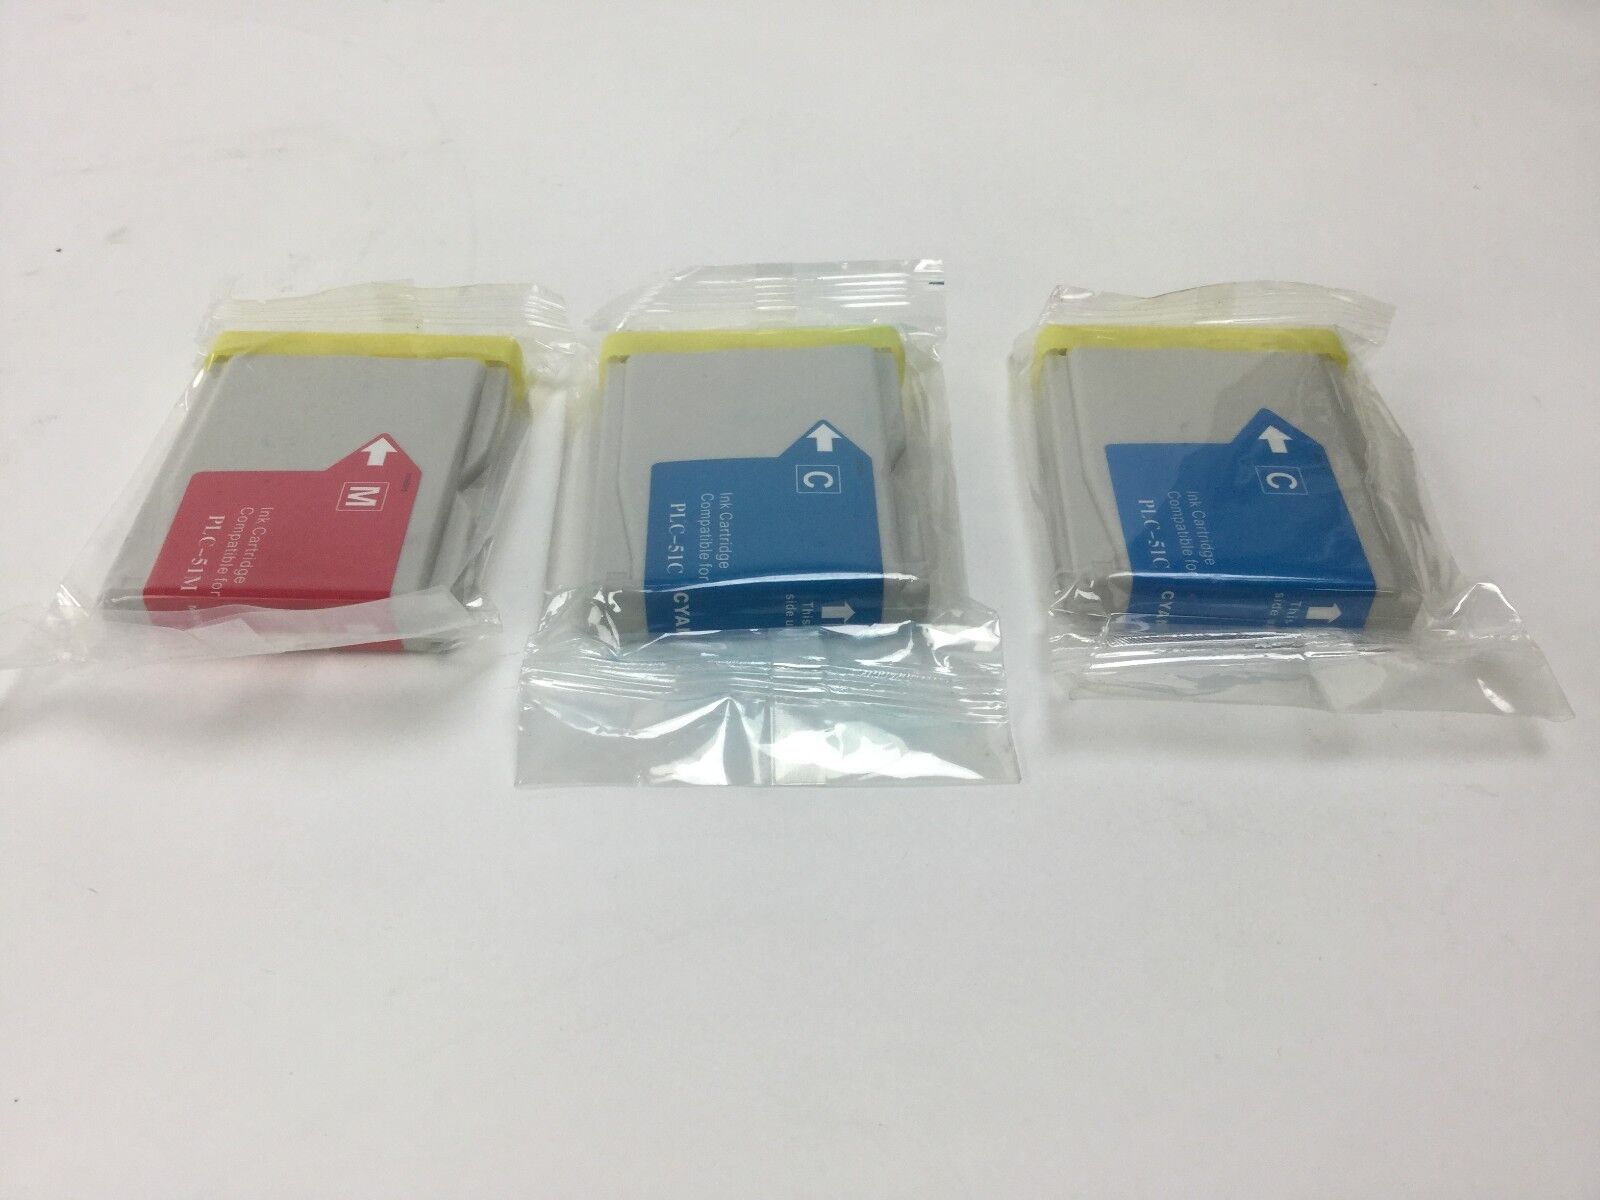 Ink Cartridges Compatible for PLC-51 (Lot of 3) (2 Cyan and 1 Magenta)